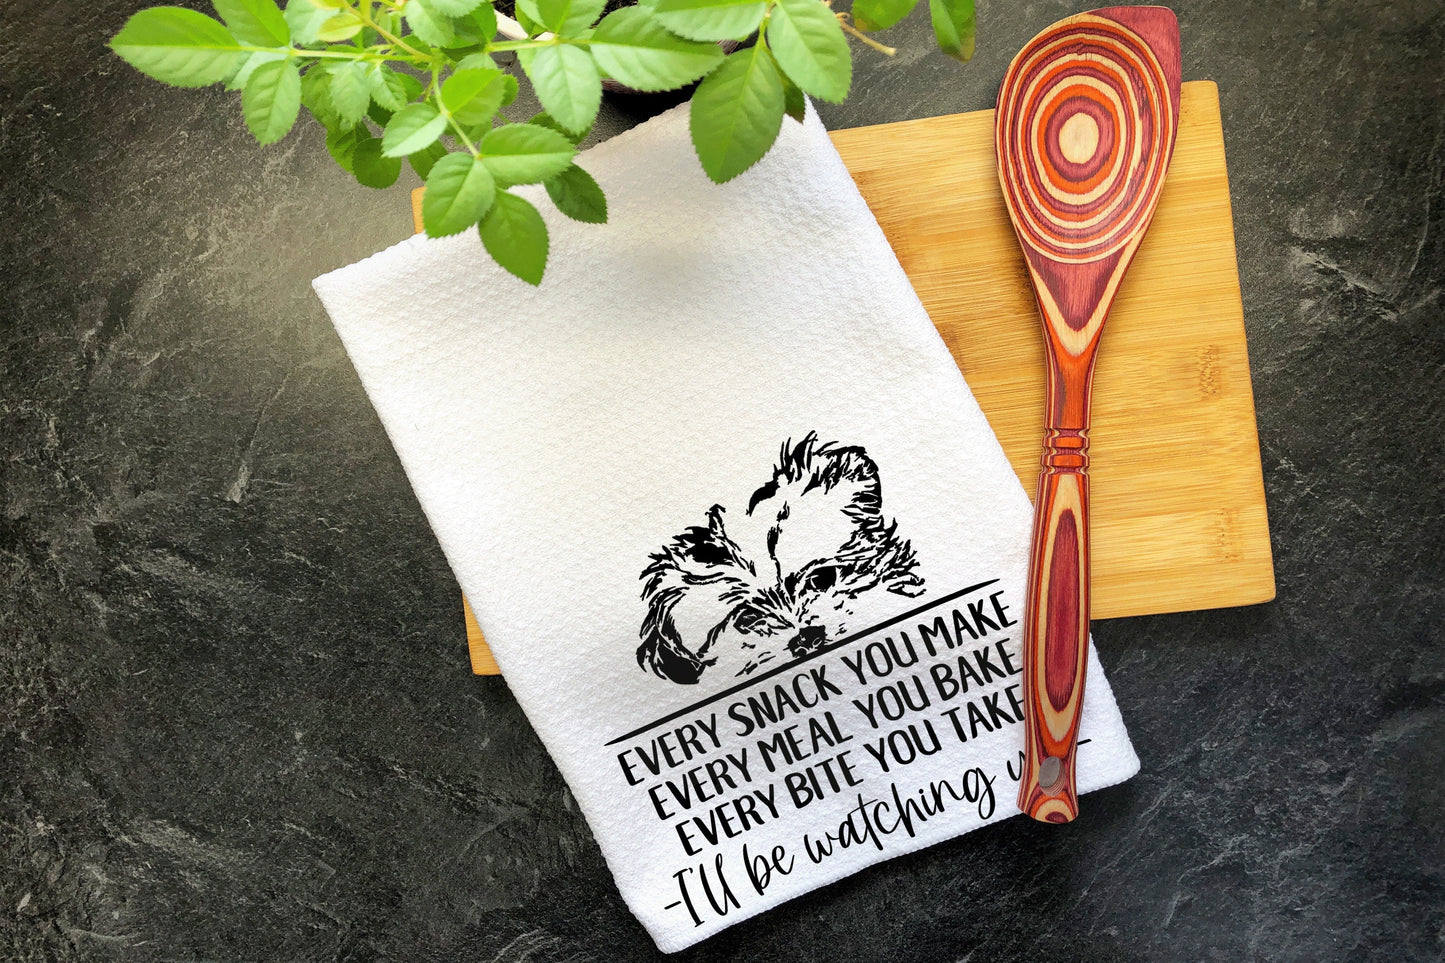 Havanese Dog Tea Towel, Every Snack You Make Every Bite You Take, Kitchen Decor, Dish Towels, Funny Kitchen Towel, Waffle Weave Towel